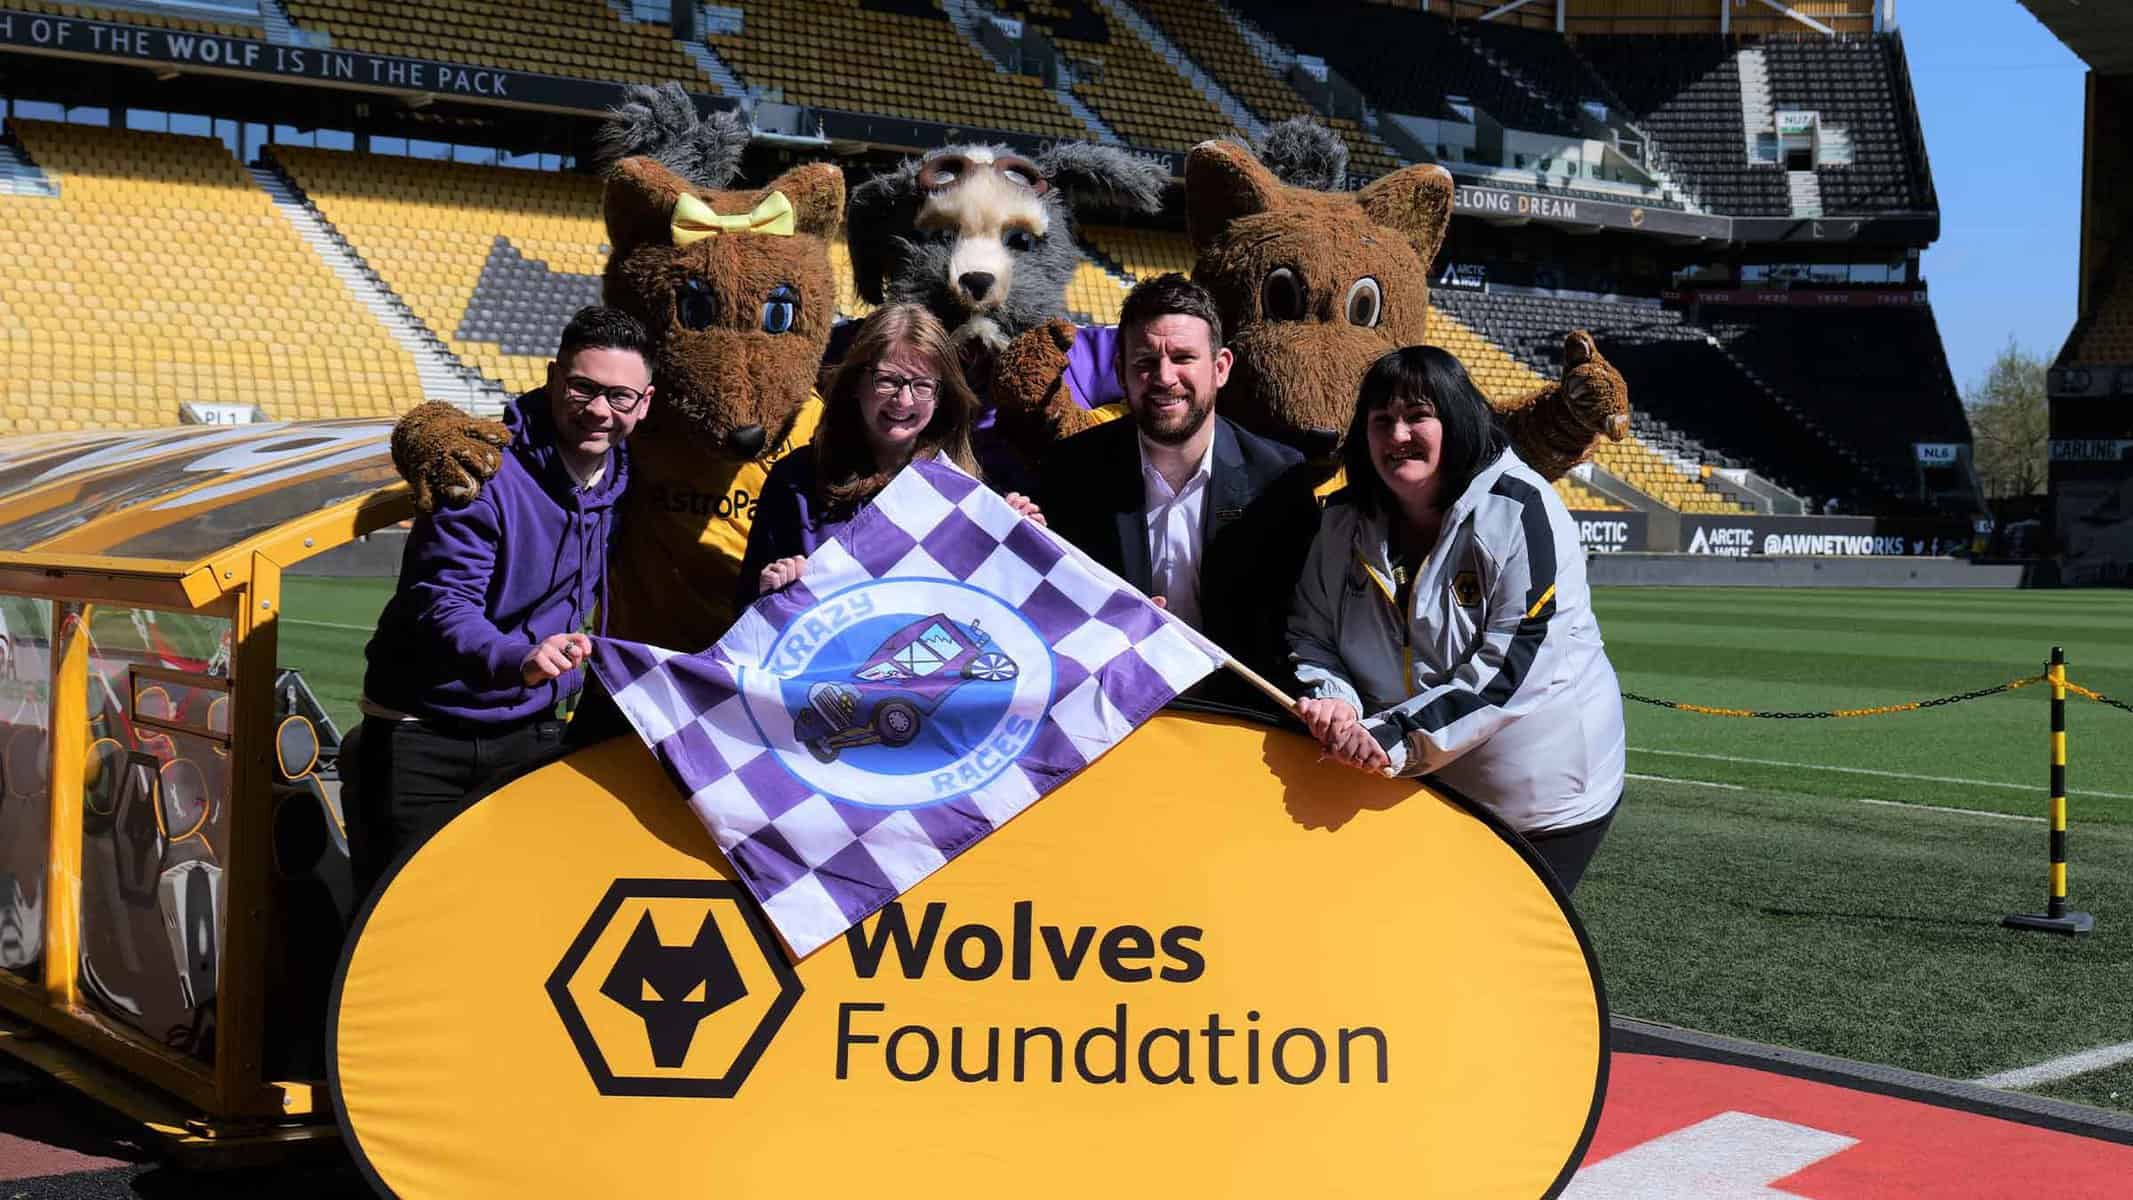 Krazy Races names Wolves Foundation as headline charity partner Image